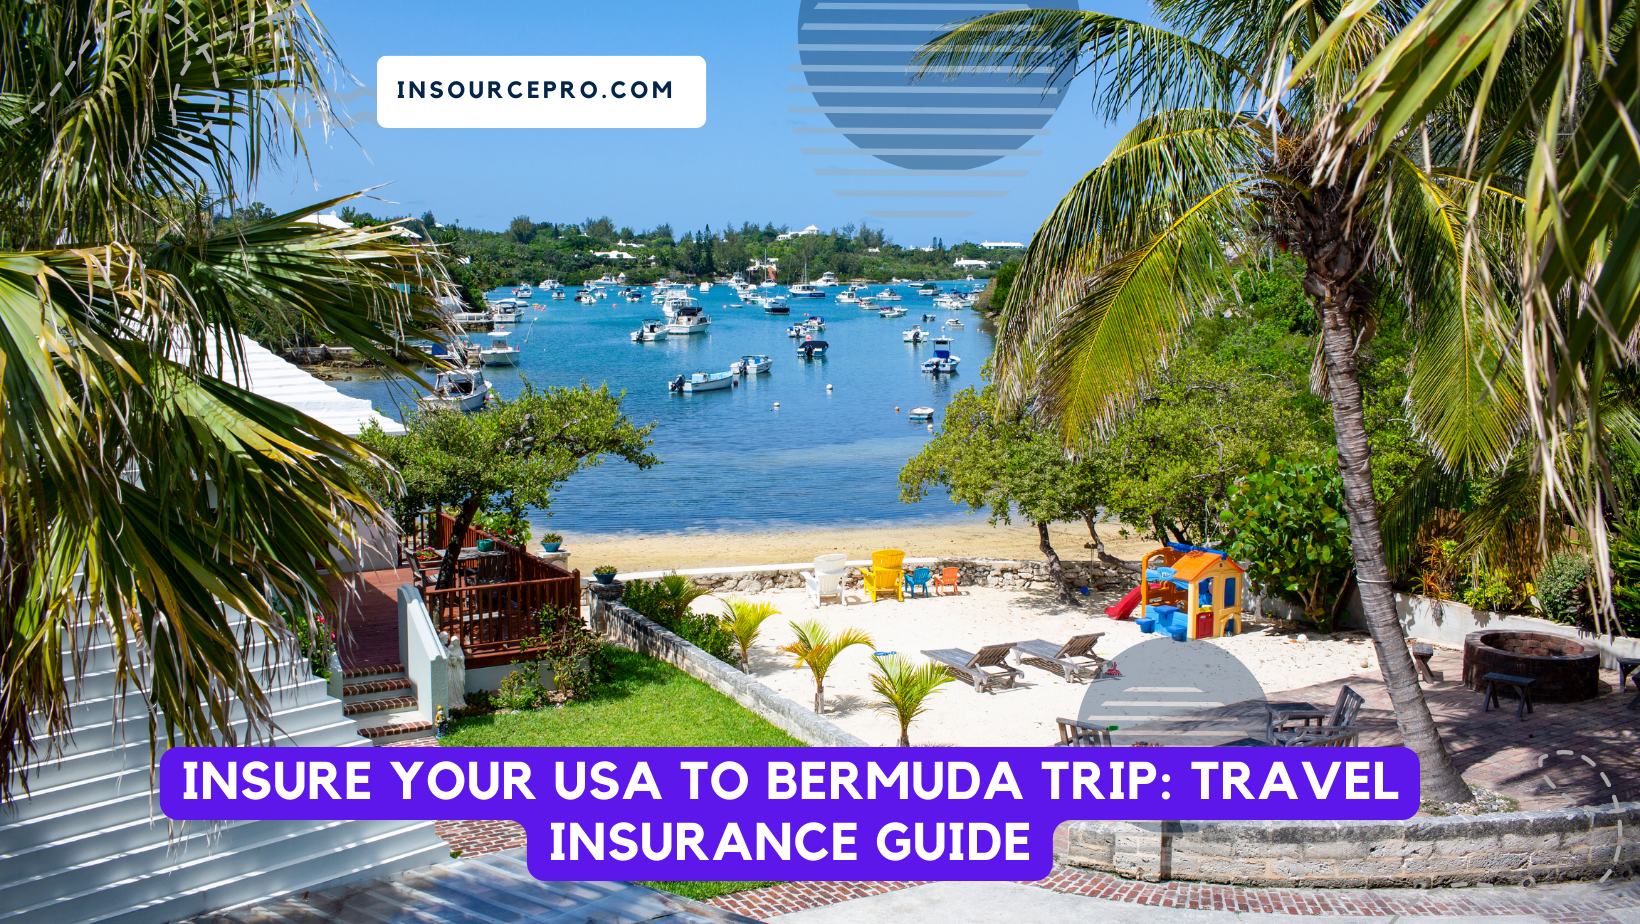 Insure Your USA to Bermuda Trip: Travel Insurance Guide